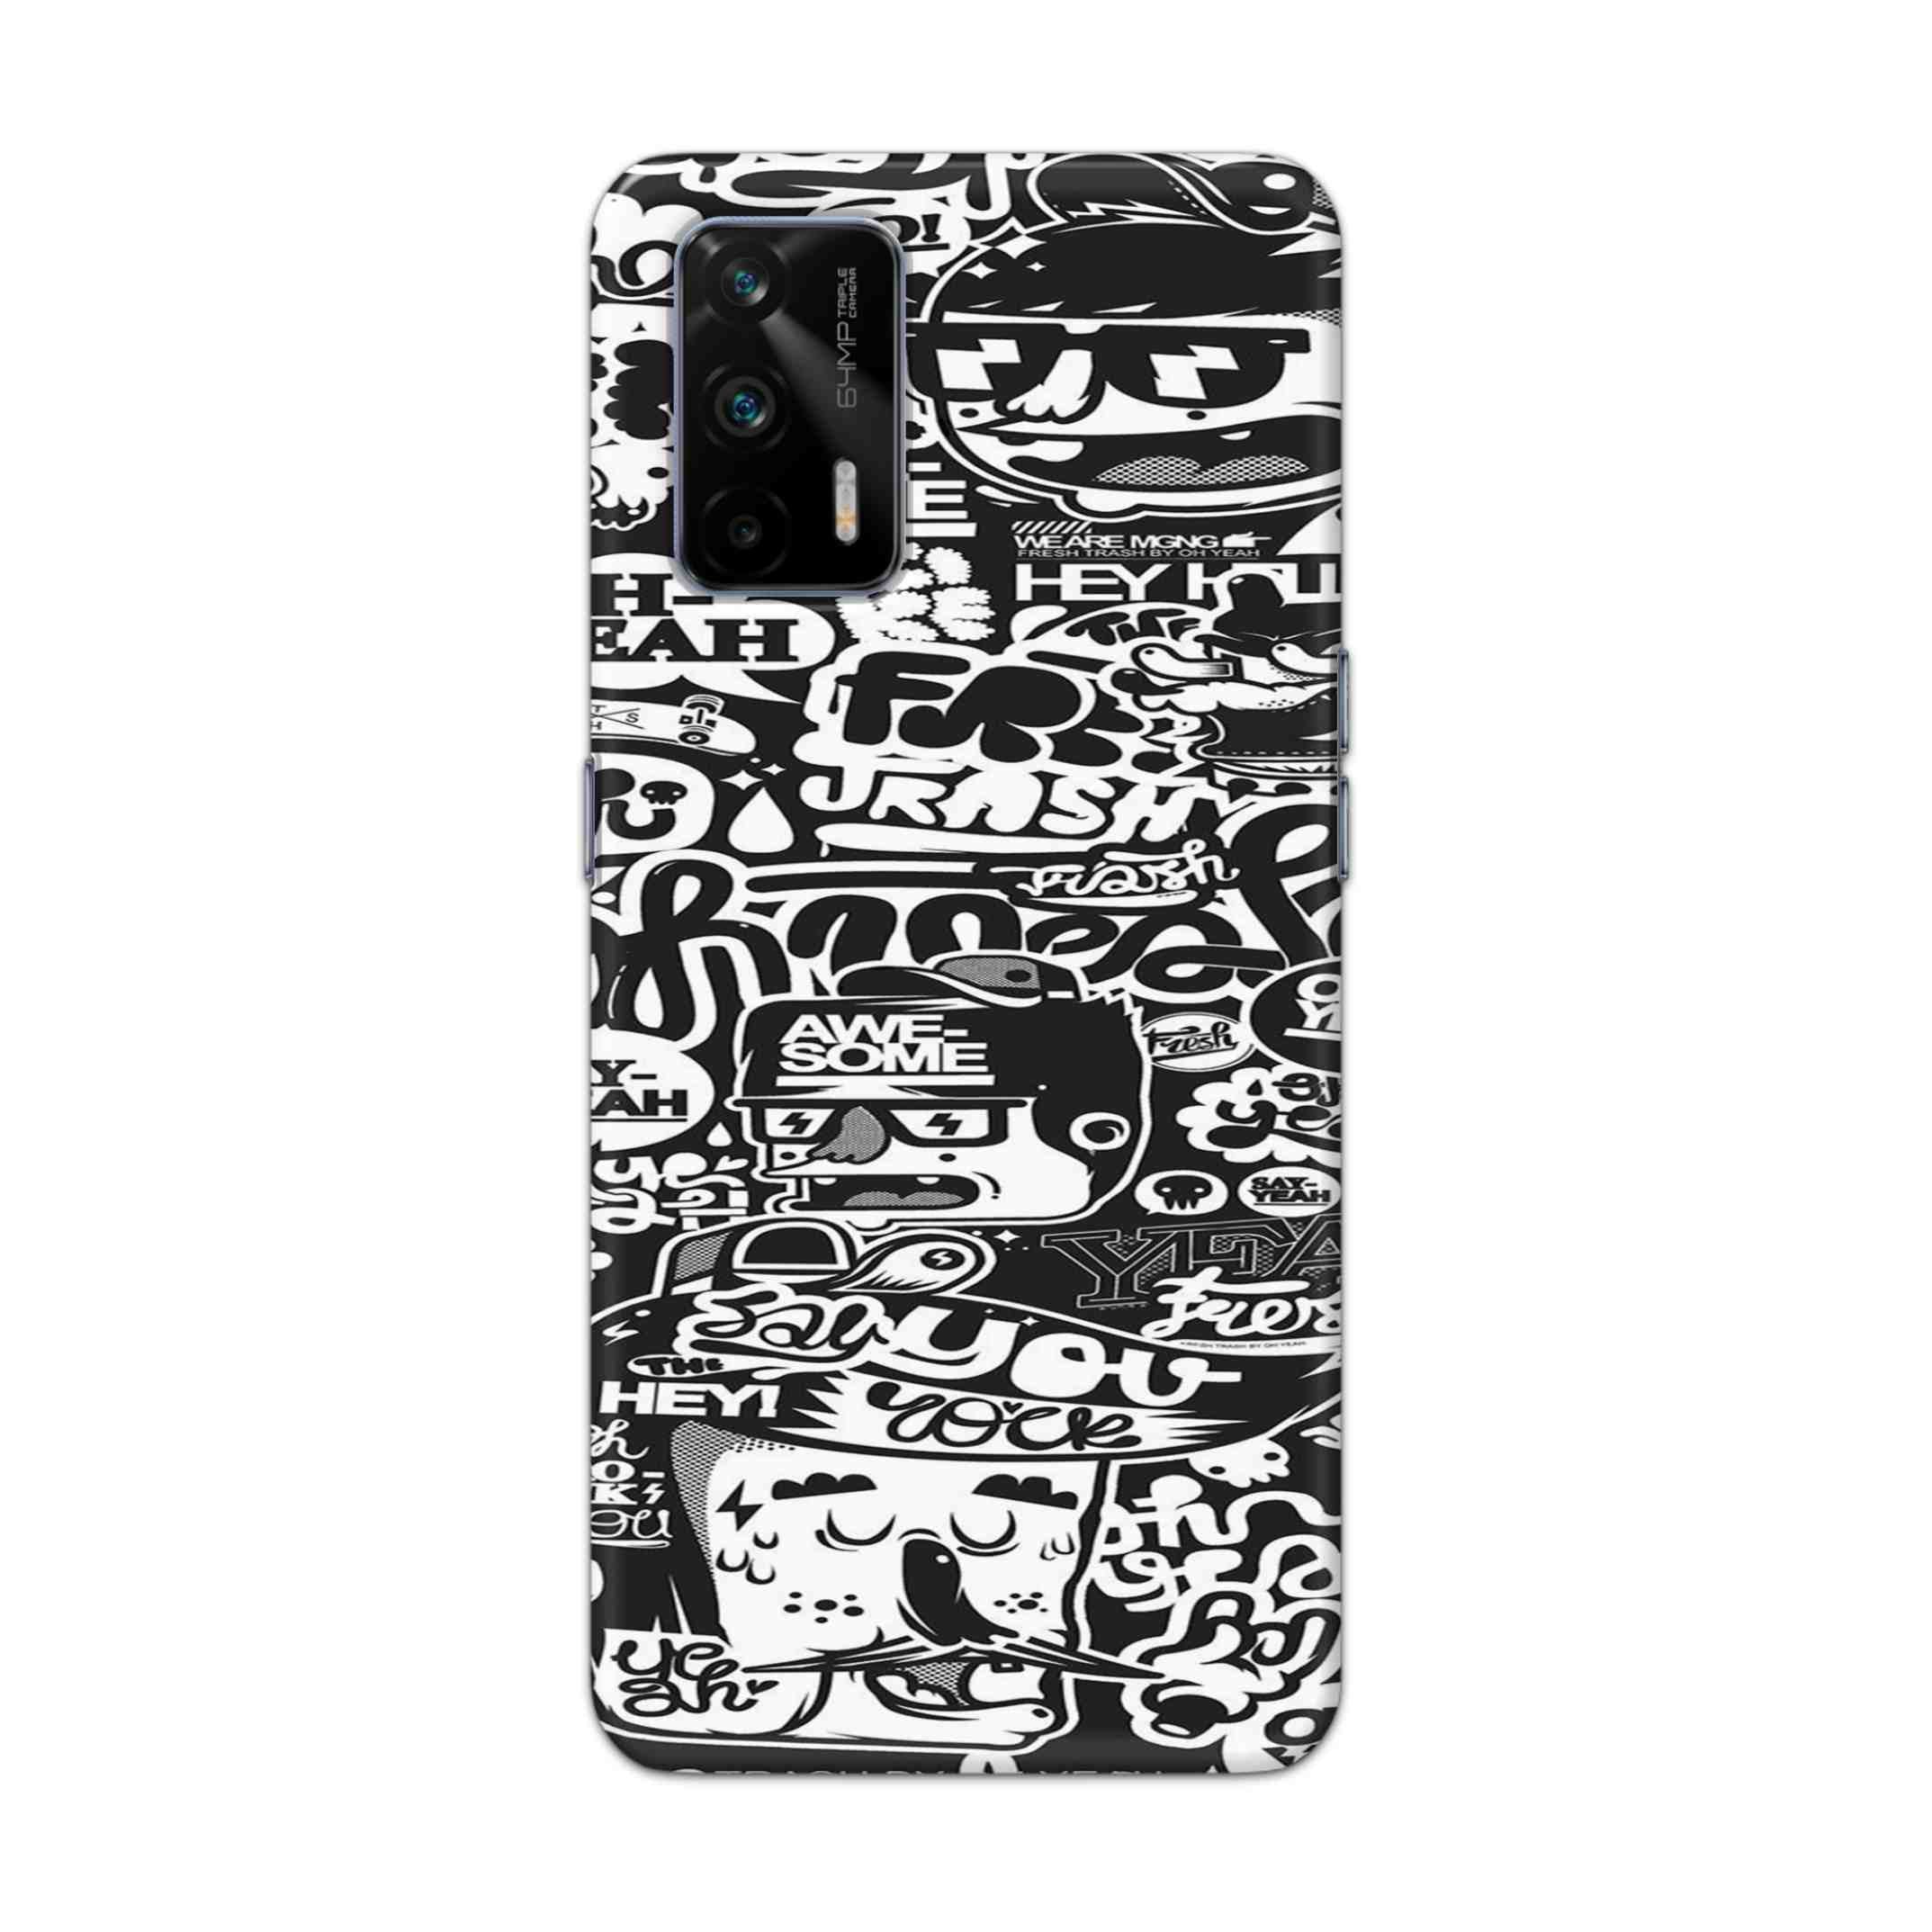 Buy Awesome Hard Back Mobile Phone Case Cover For Realme GT 5G Online